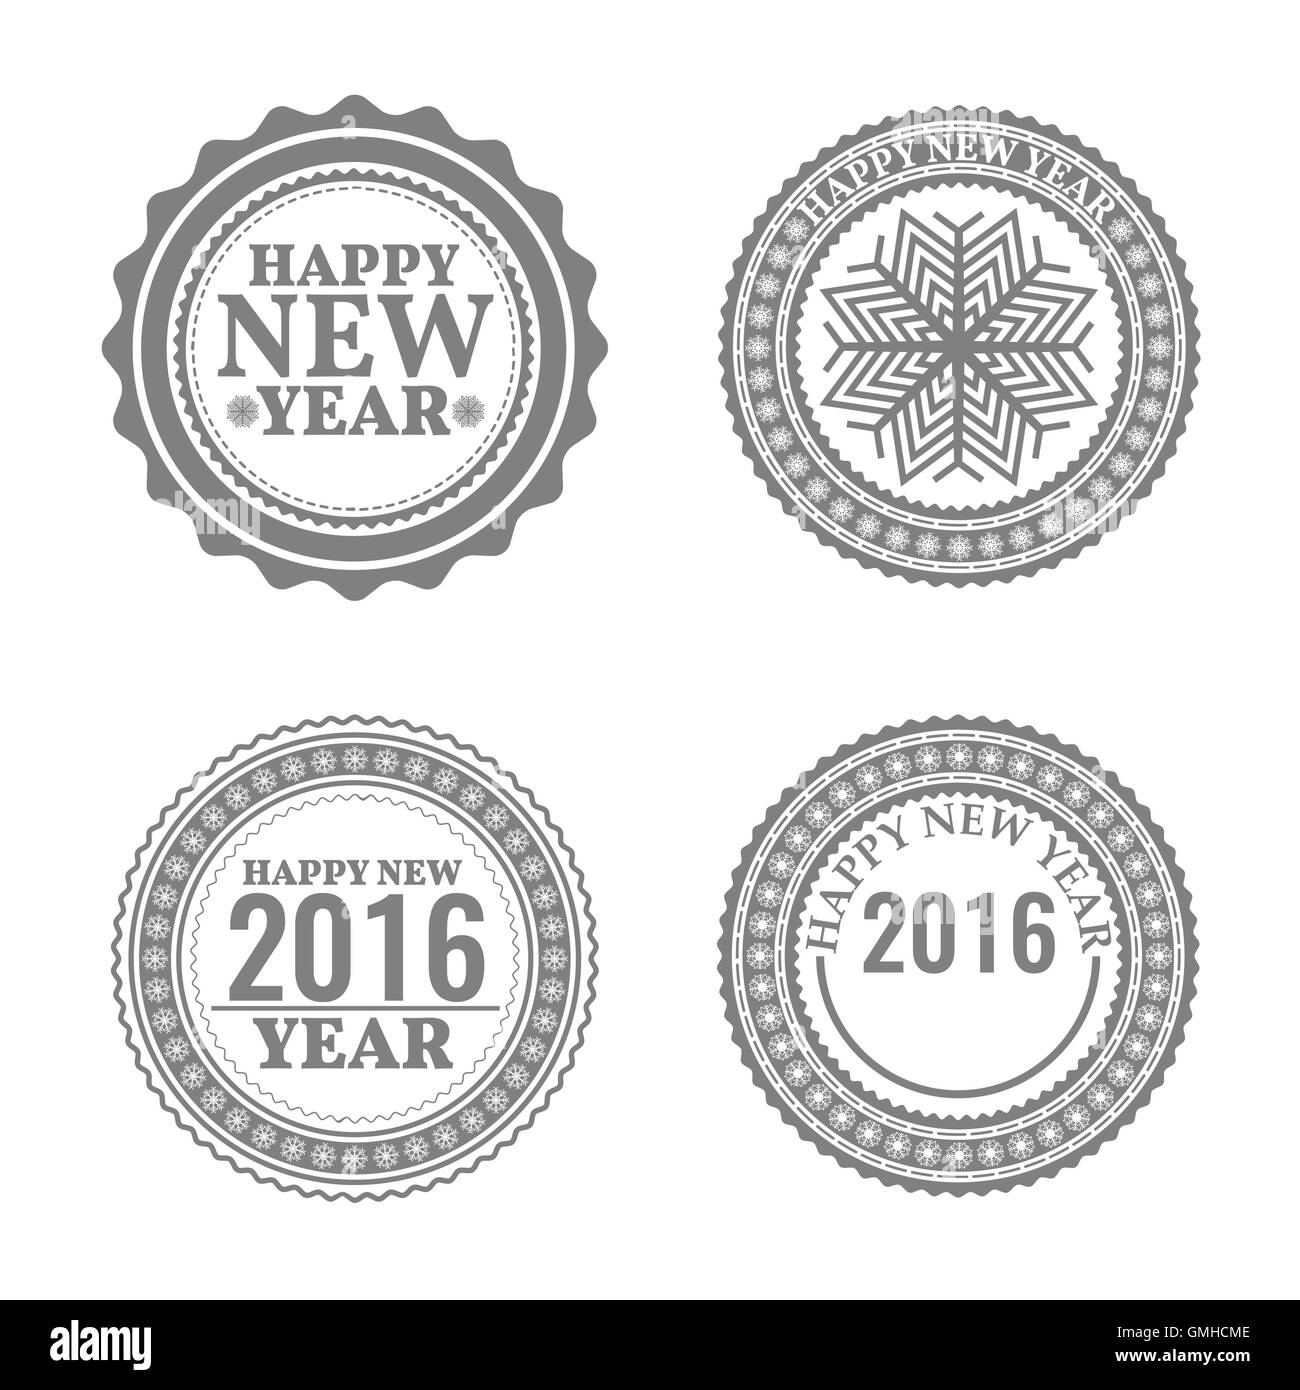 New Year set, labels and emblems, vector illustration. Stock Vector